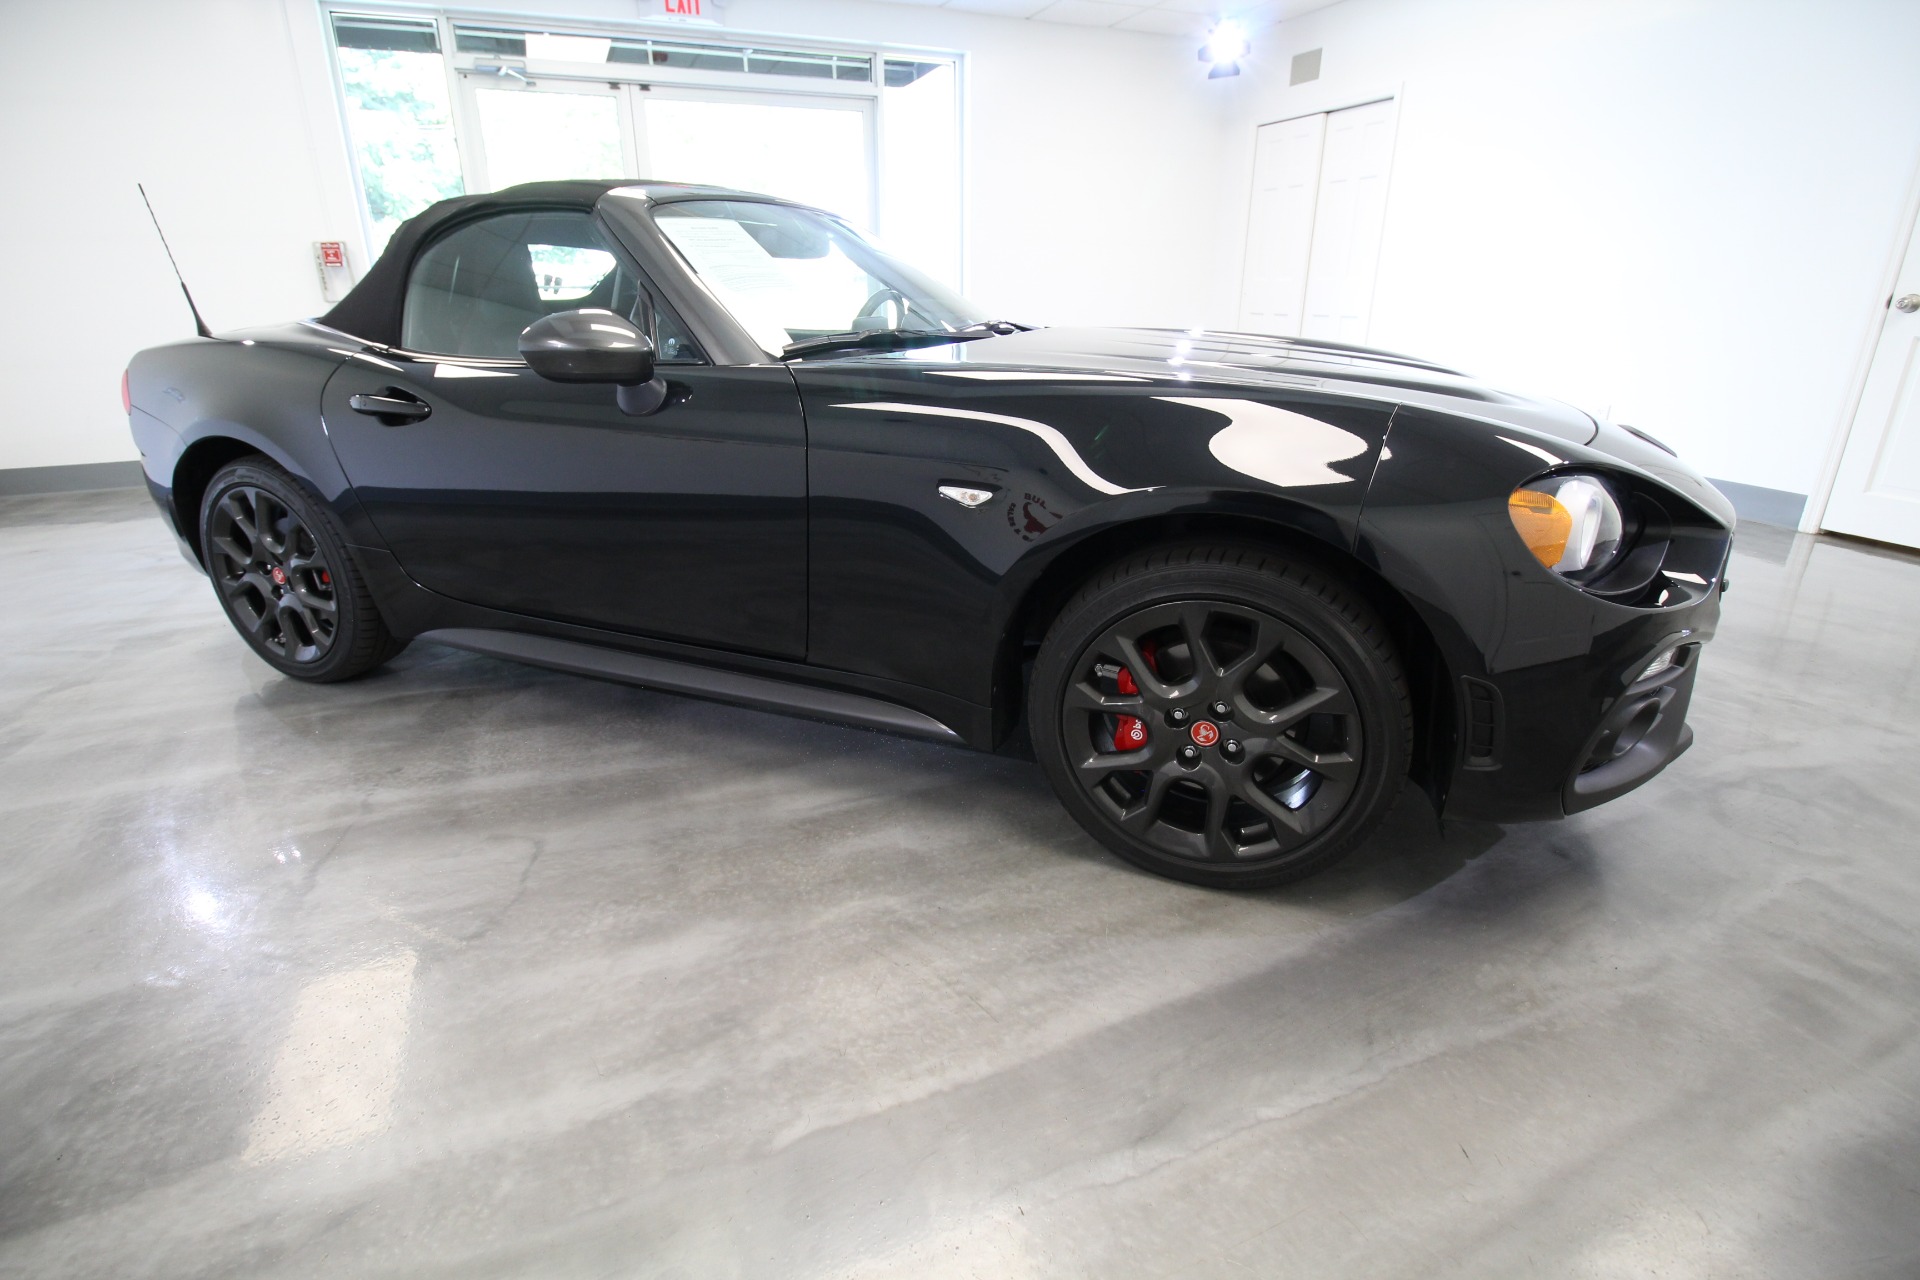 Used 2018 Nero Cinema Jet Black Fiat Spider 124 ABARTH Clean LOW MILAGE Abarth Convertible | Albany, NY